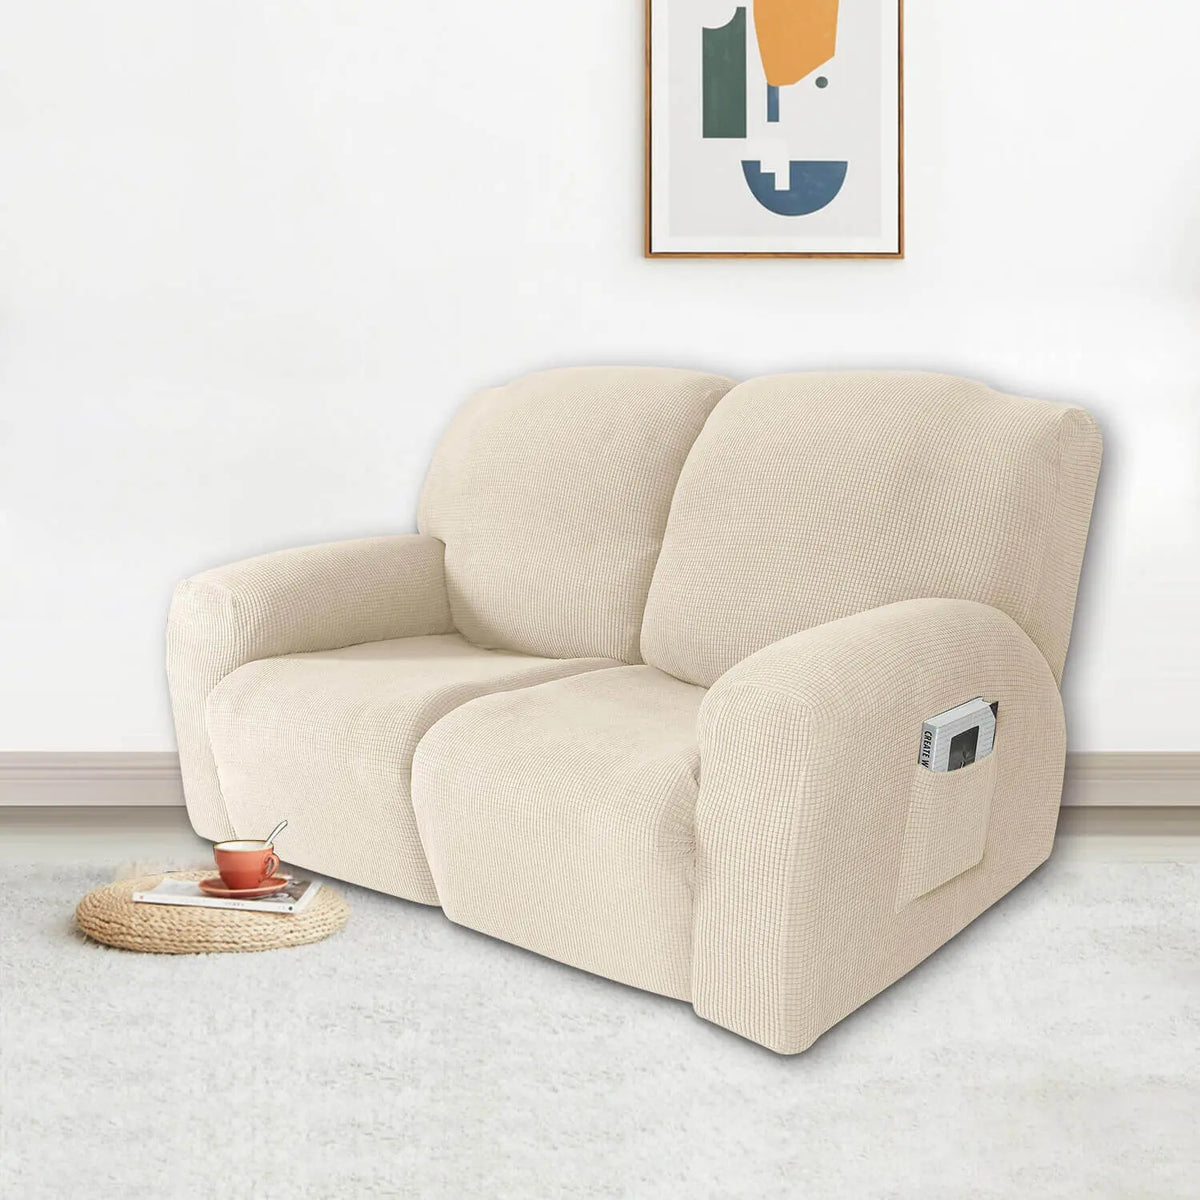 Recliner Couch Covers Fitted Recliner Loveseat Sofa Cover Crfatop %sku%